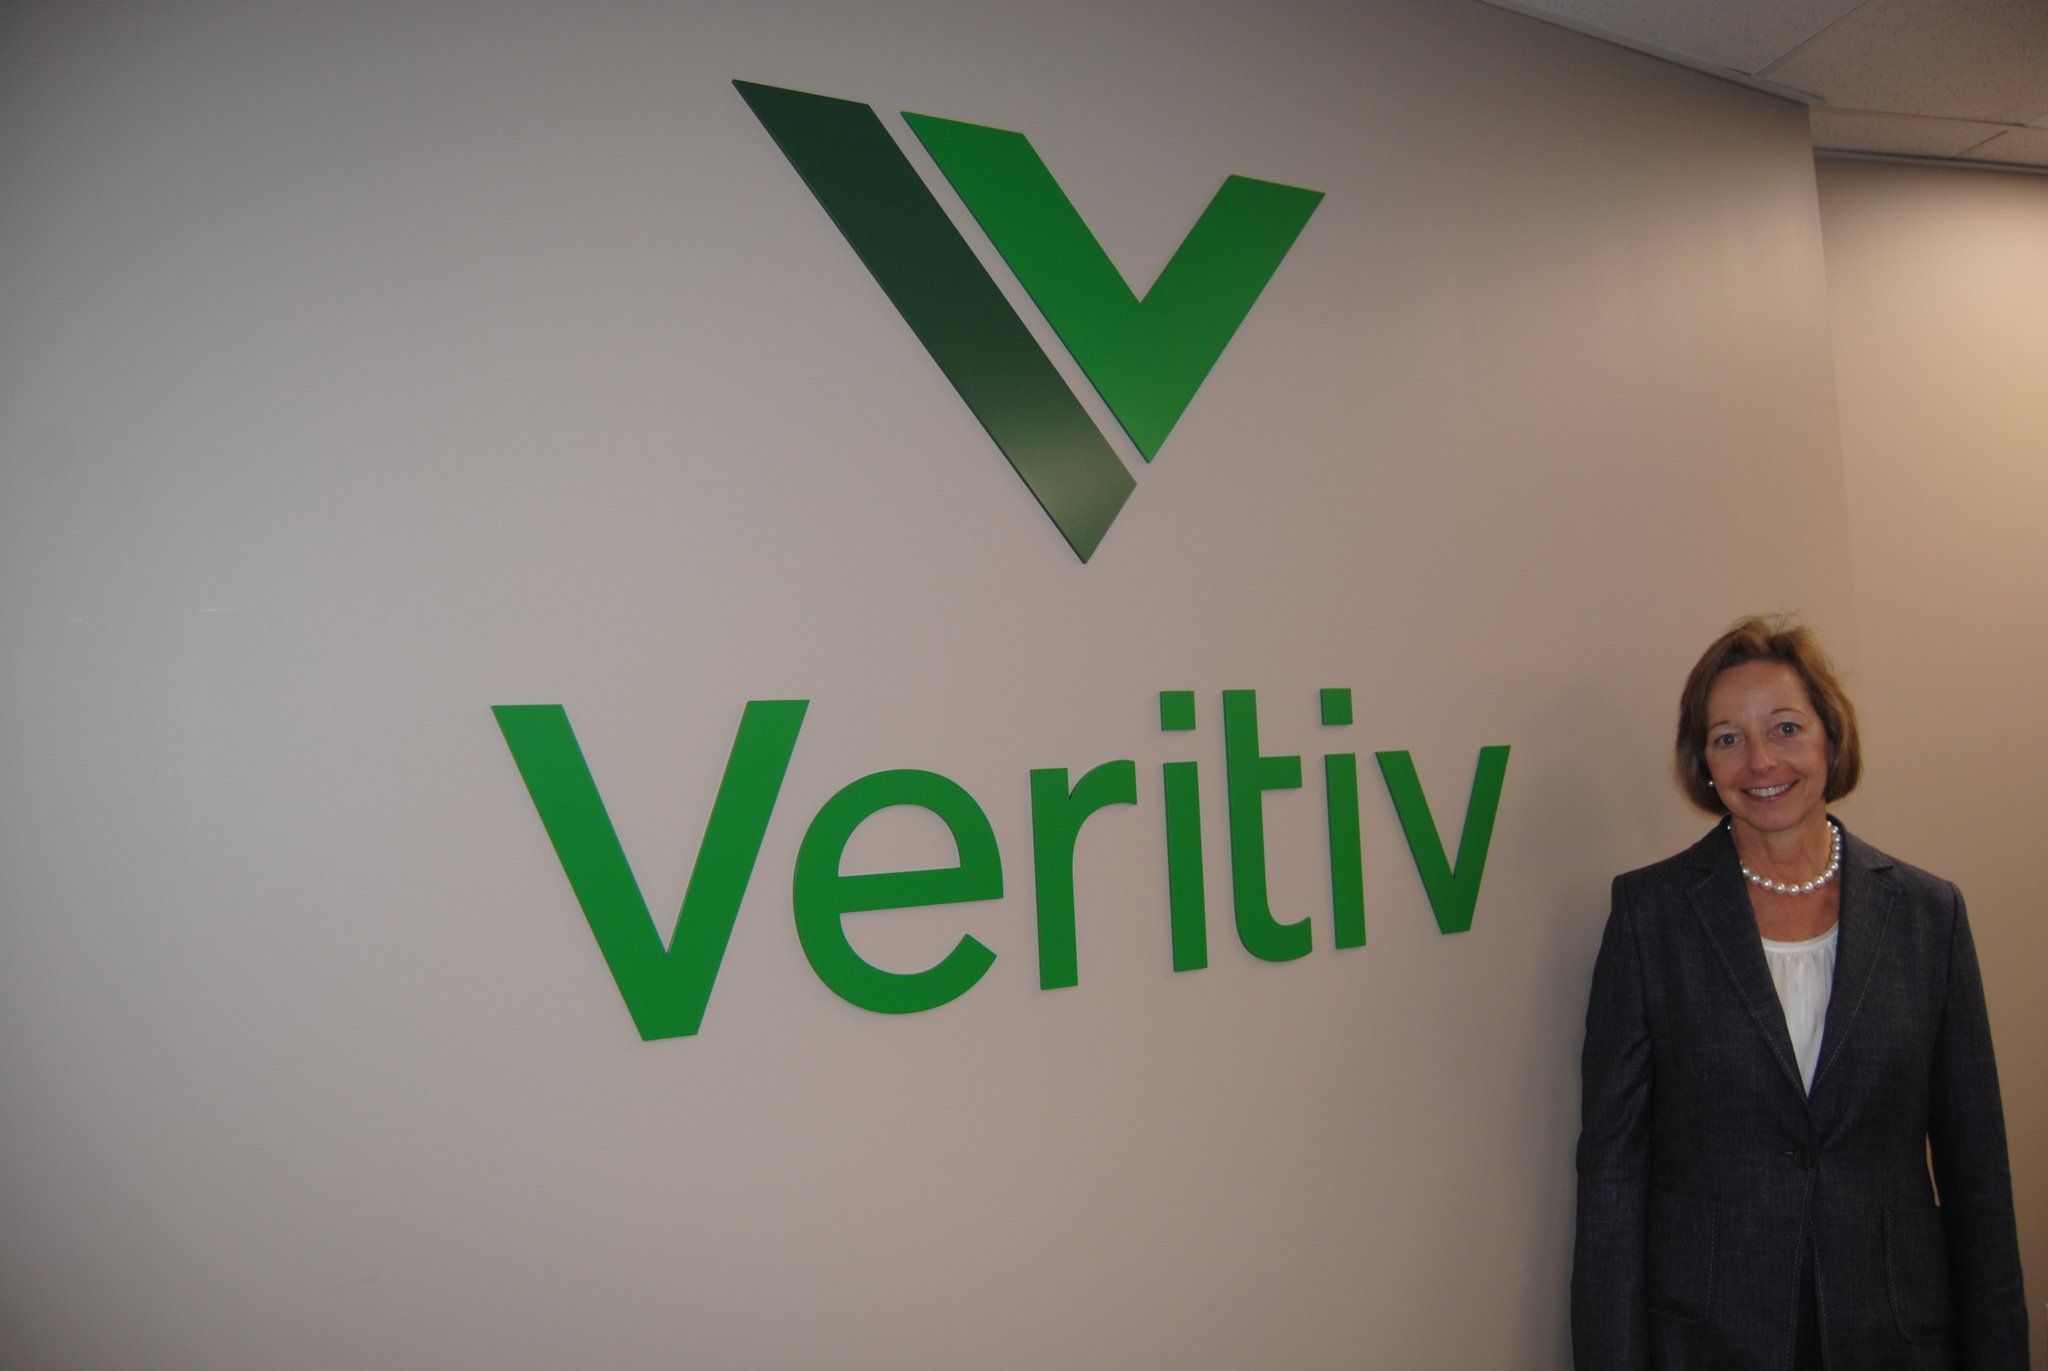 Mary Laschinger retired as Veritiv chief executive officer in 2020. File photo. ERIC SCHWARTZBERG/STAFF